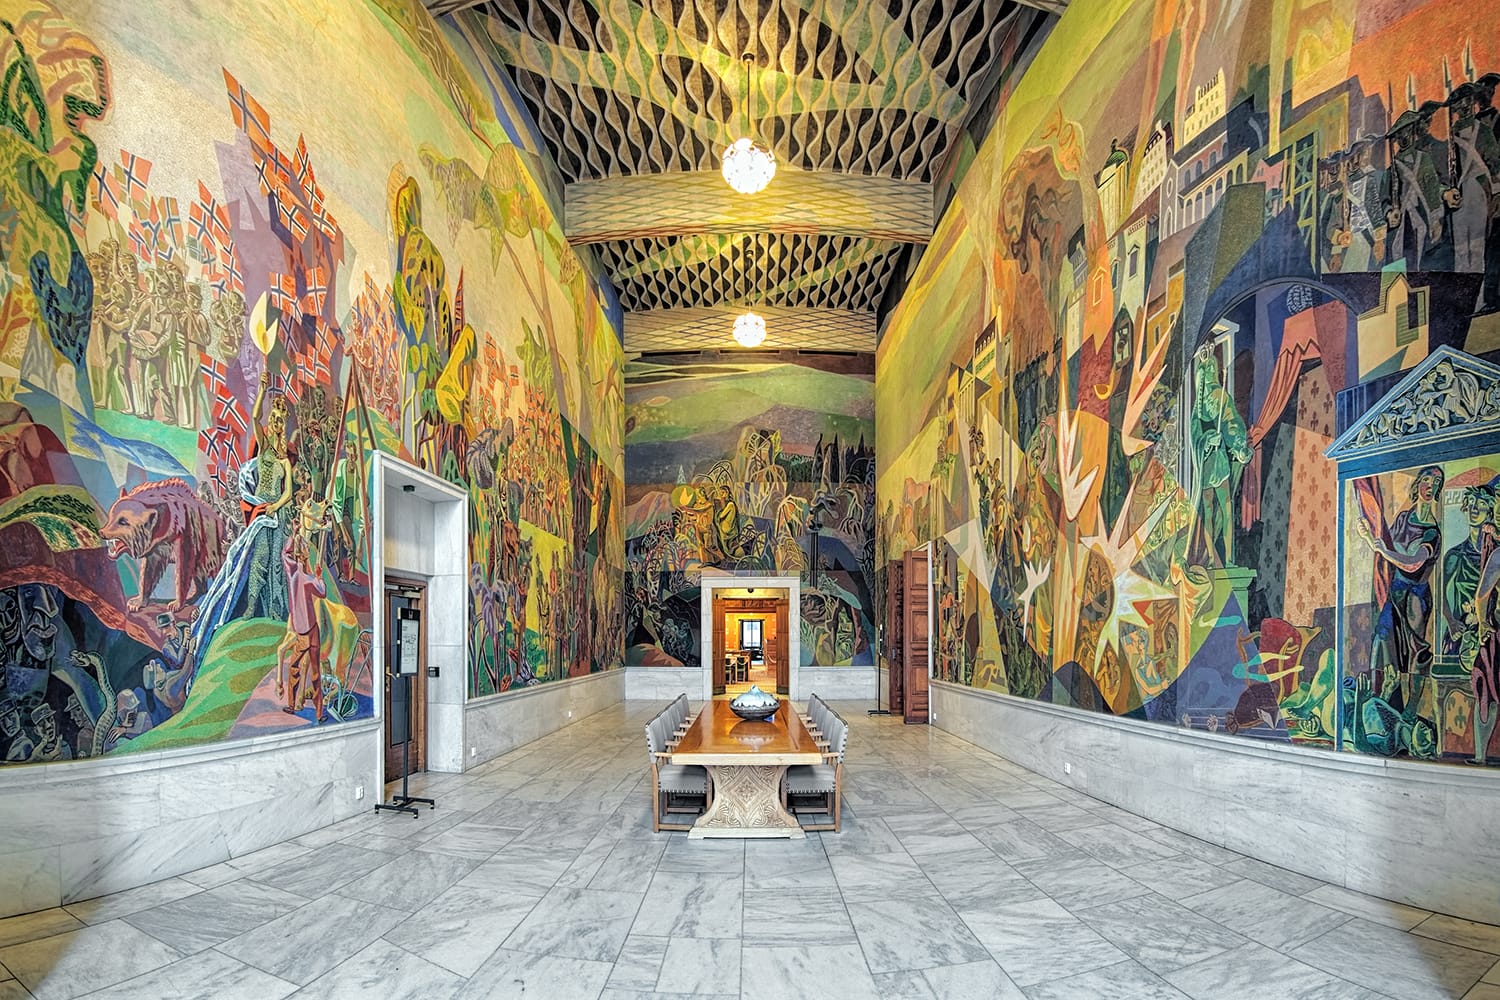  Interior of West Gallery (Storstein room) in Oslo City Hall with frescoes "Human Rights" painted by the Norwegian artist Aage Storstein in 1938-1950.